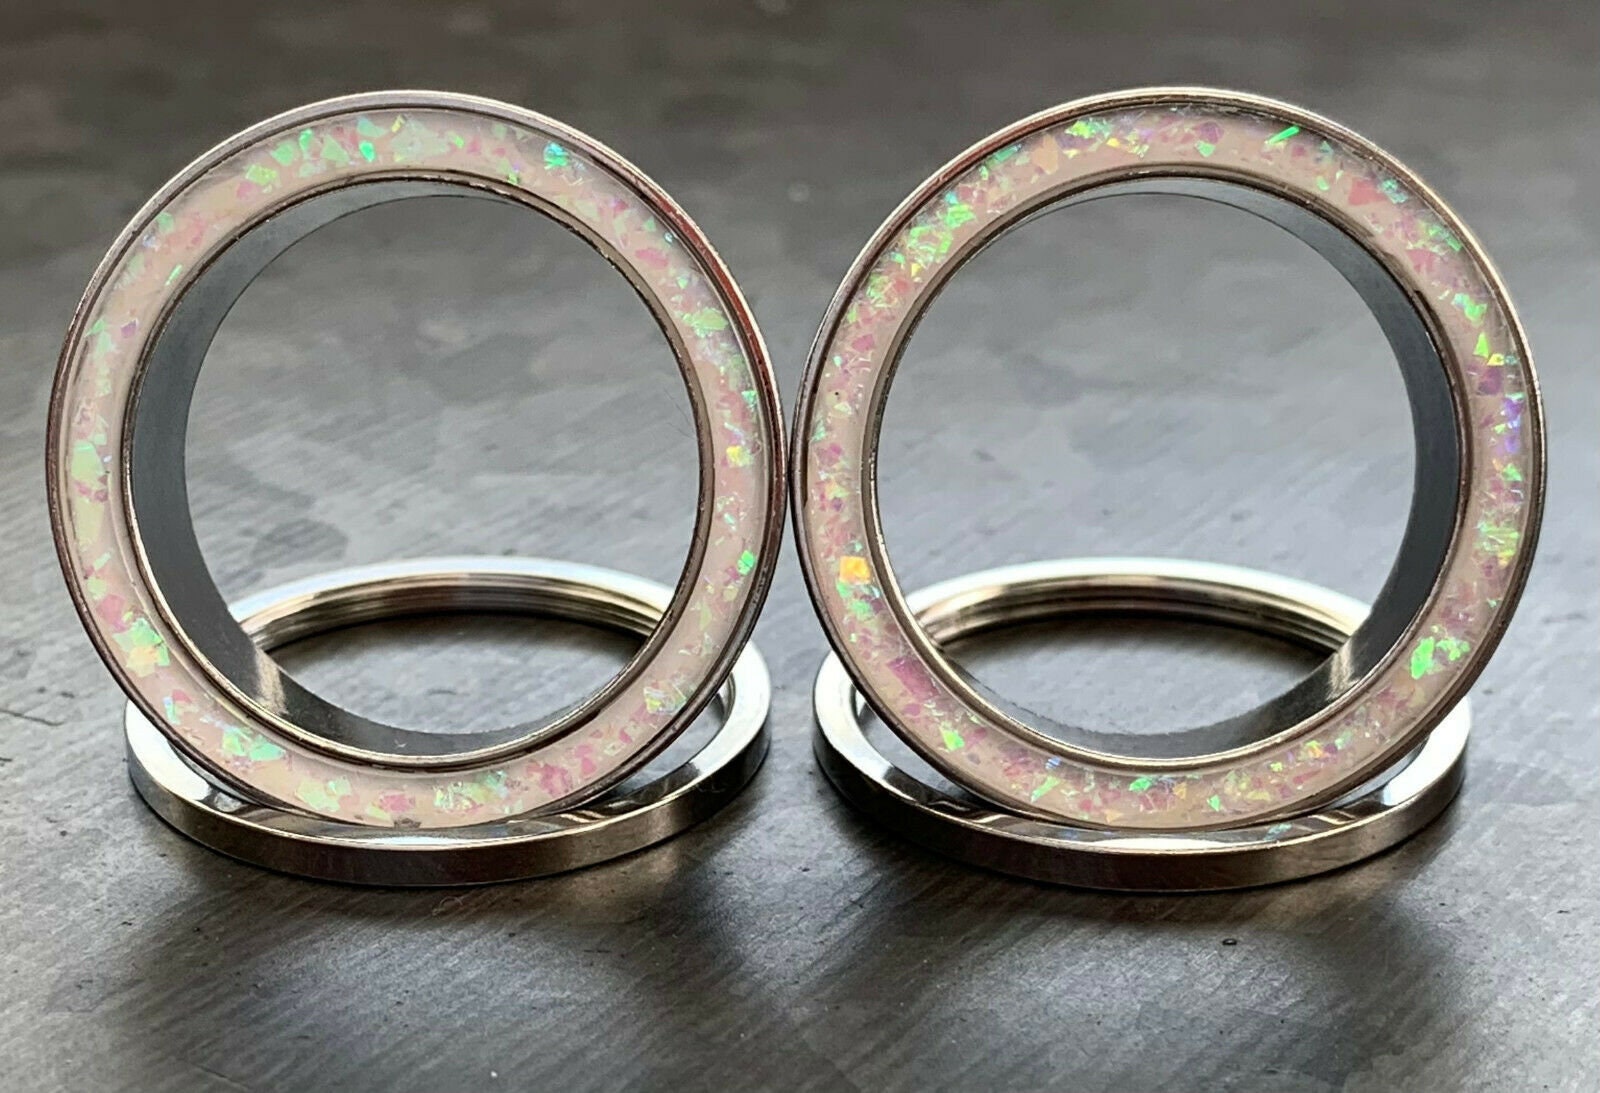 50 Pieces Stainless Steel Jump Rings 3.5mm Anodized and Plated Fine Gauge  Hypoallergenic Tarnish Resistant 